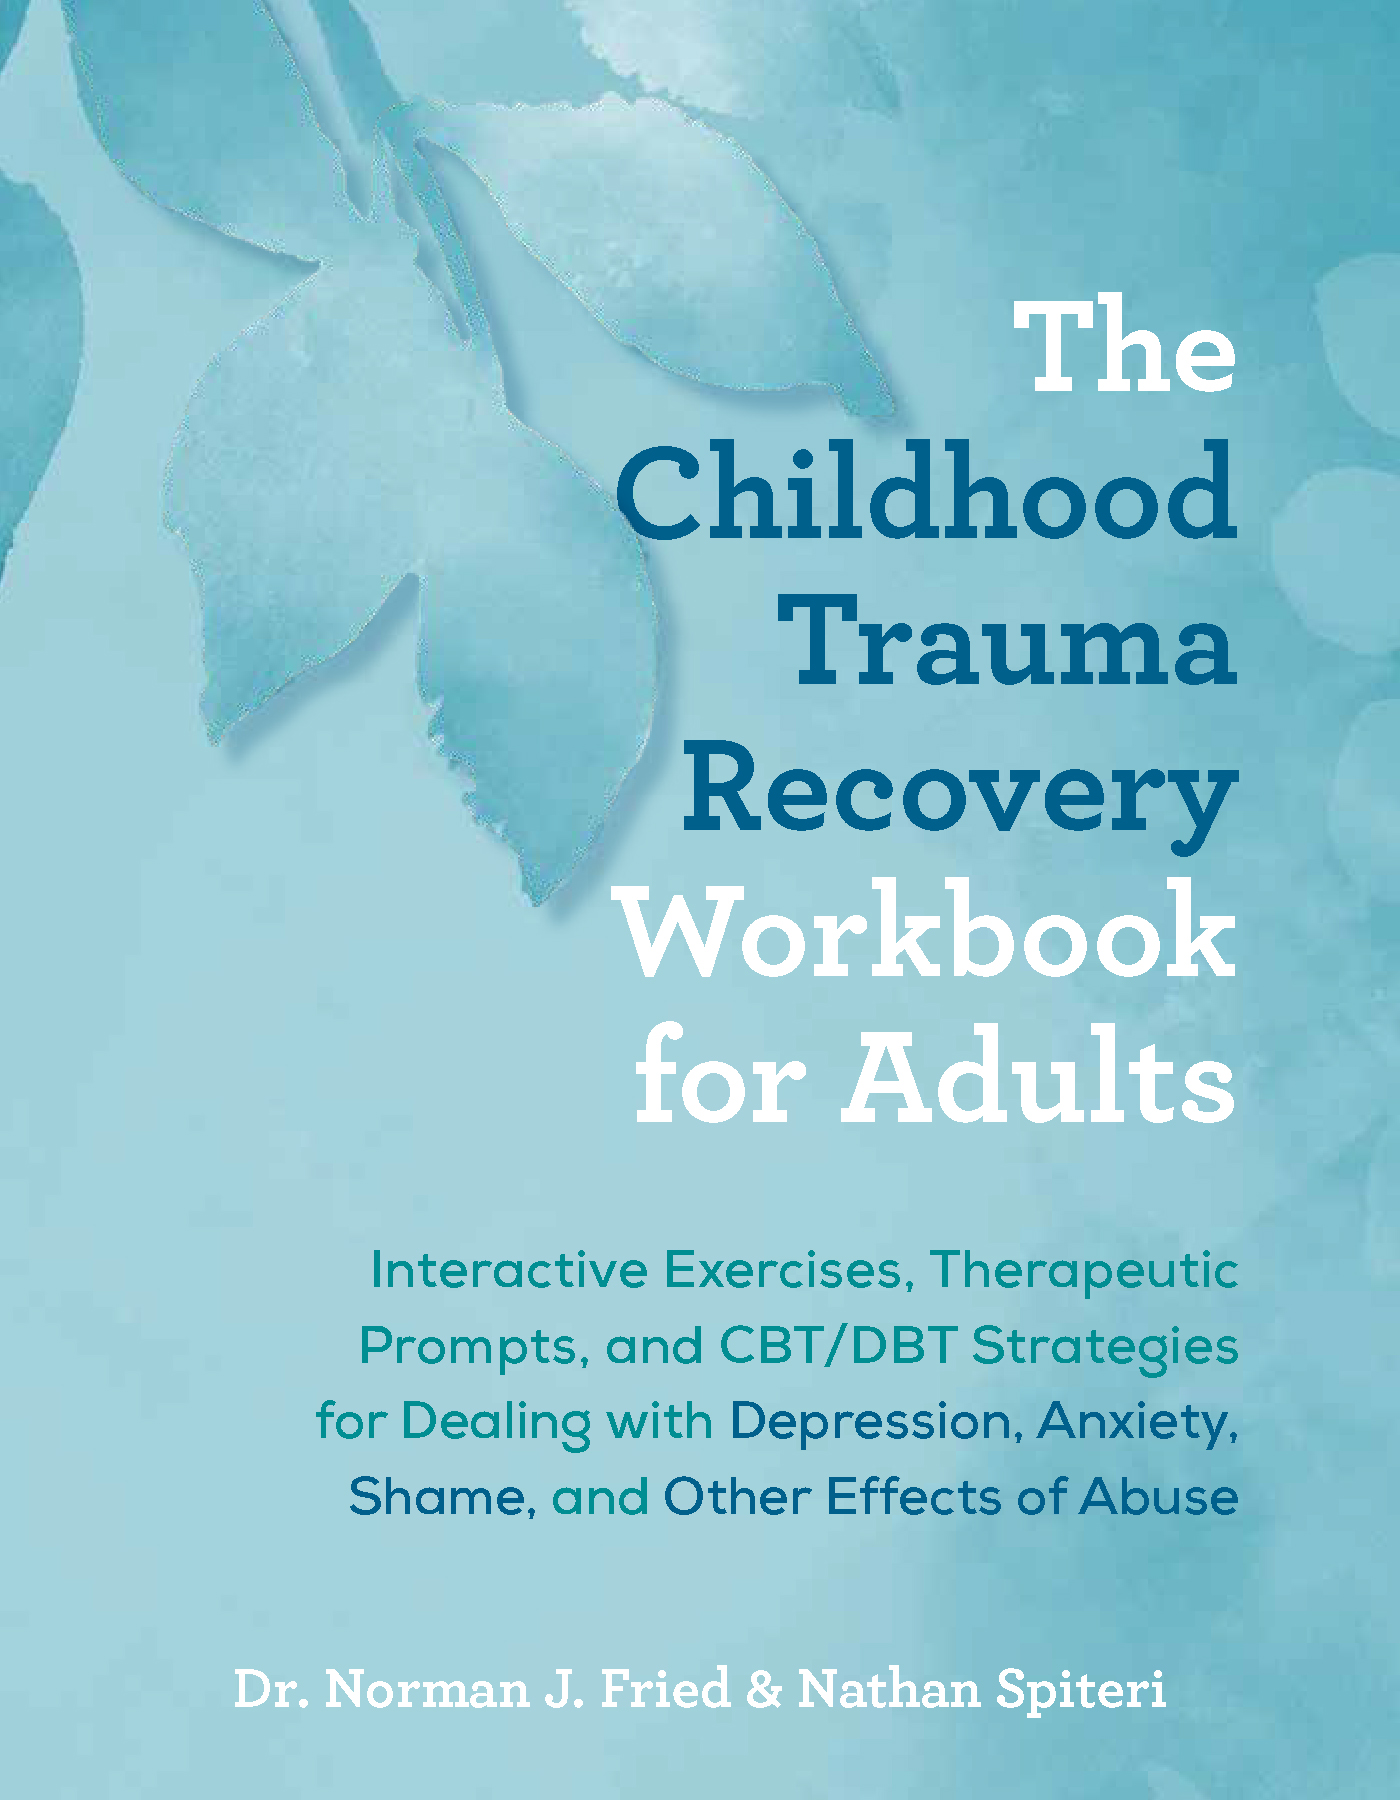 Childhood Trauma Recovery Workbook for Adults